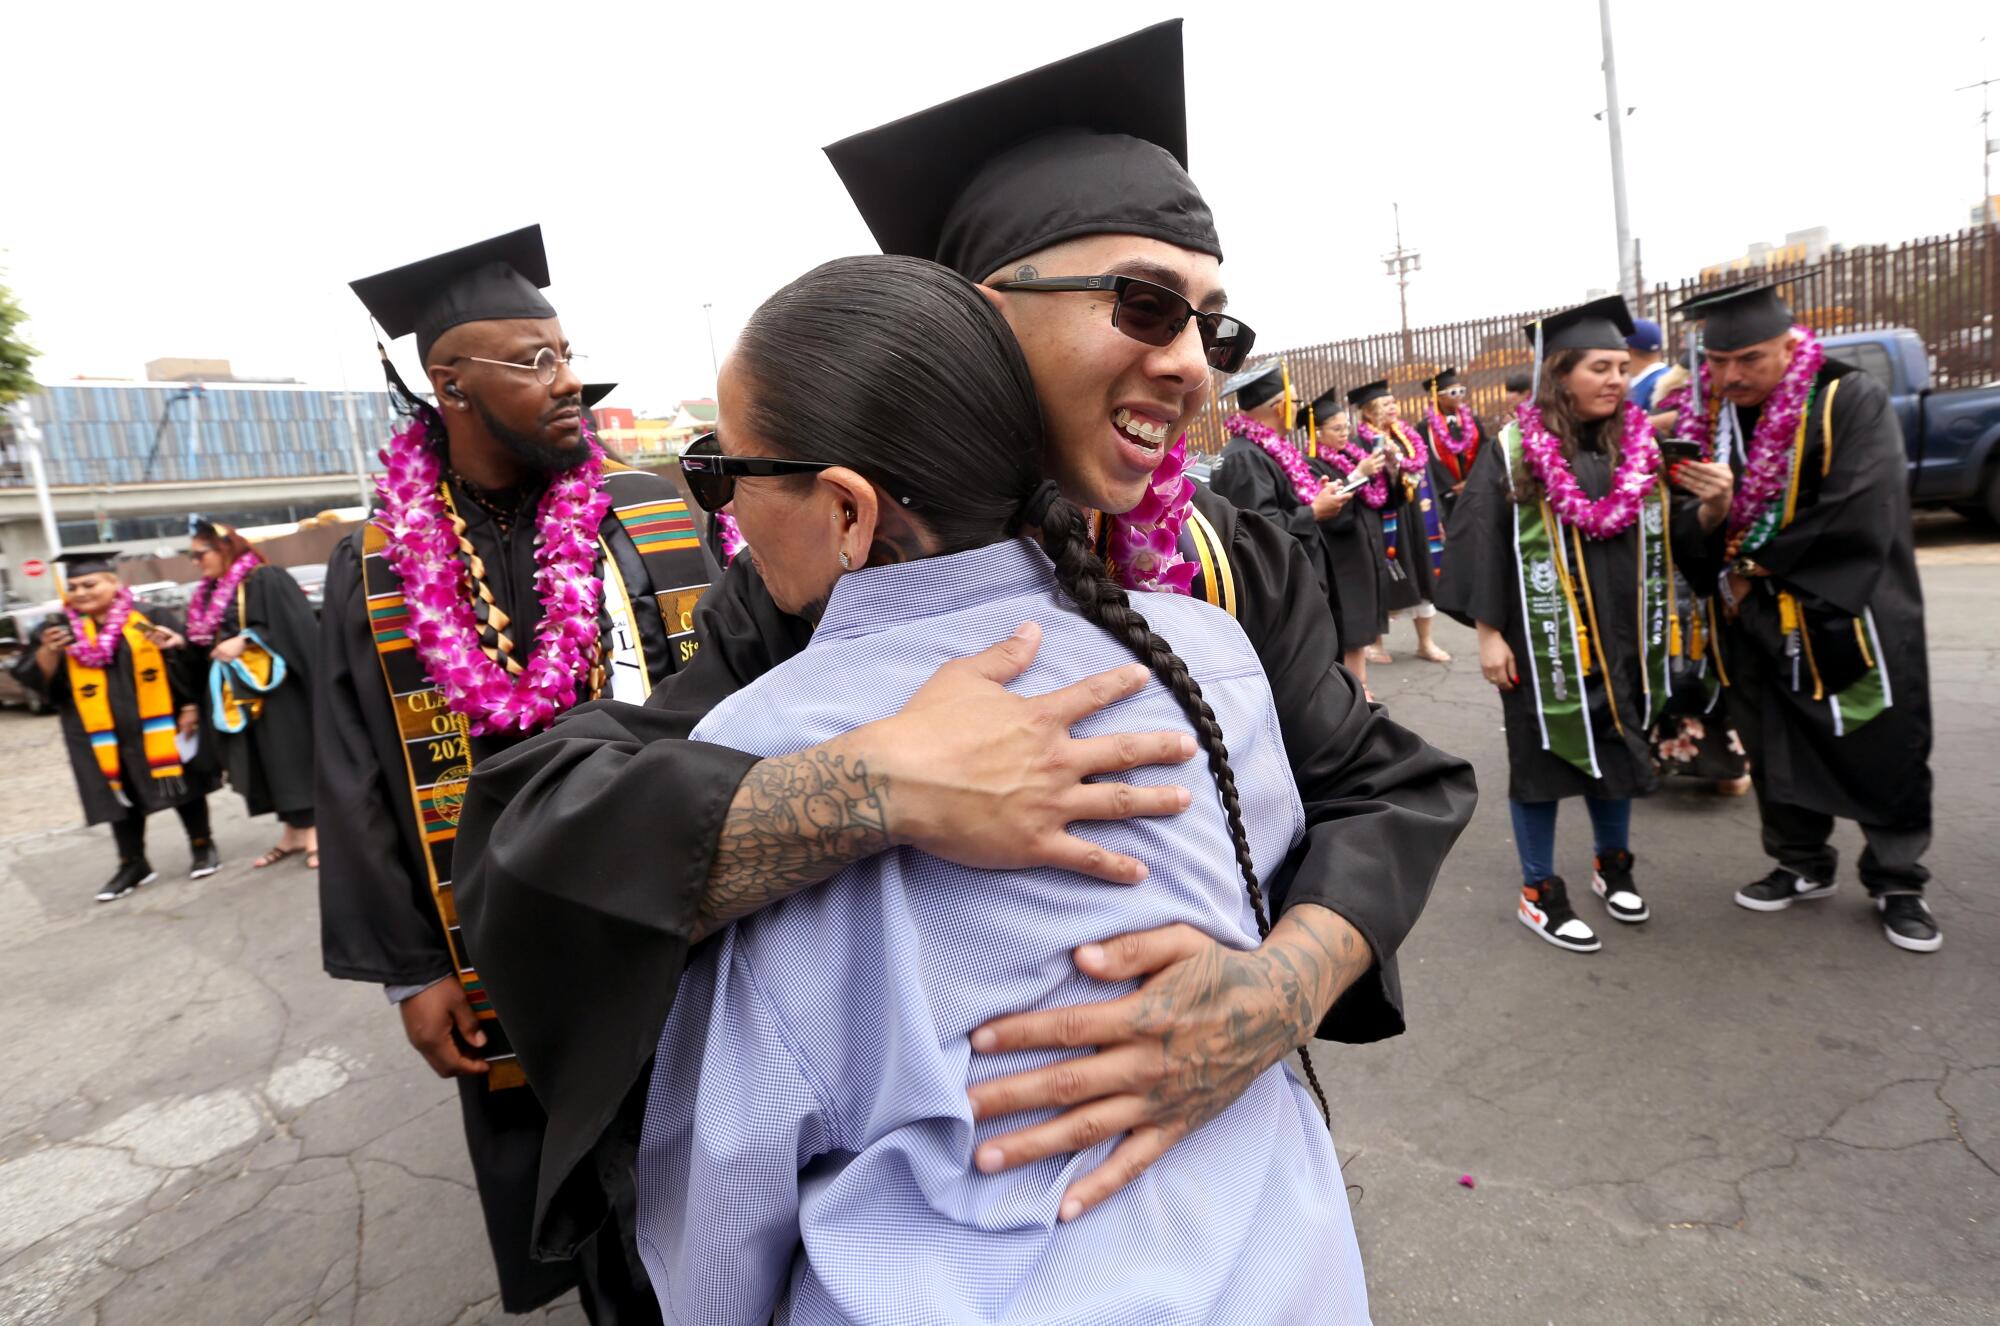 Wearing a graduation gown and cap, Jessi Fernandez faces the camera as he hugs another person